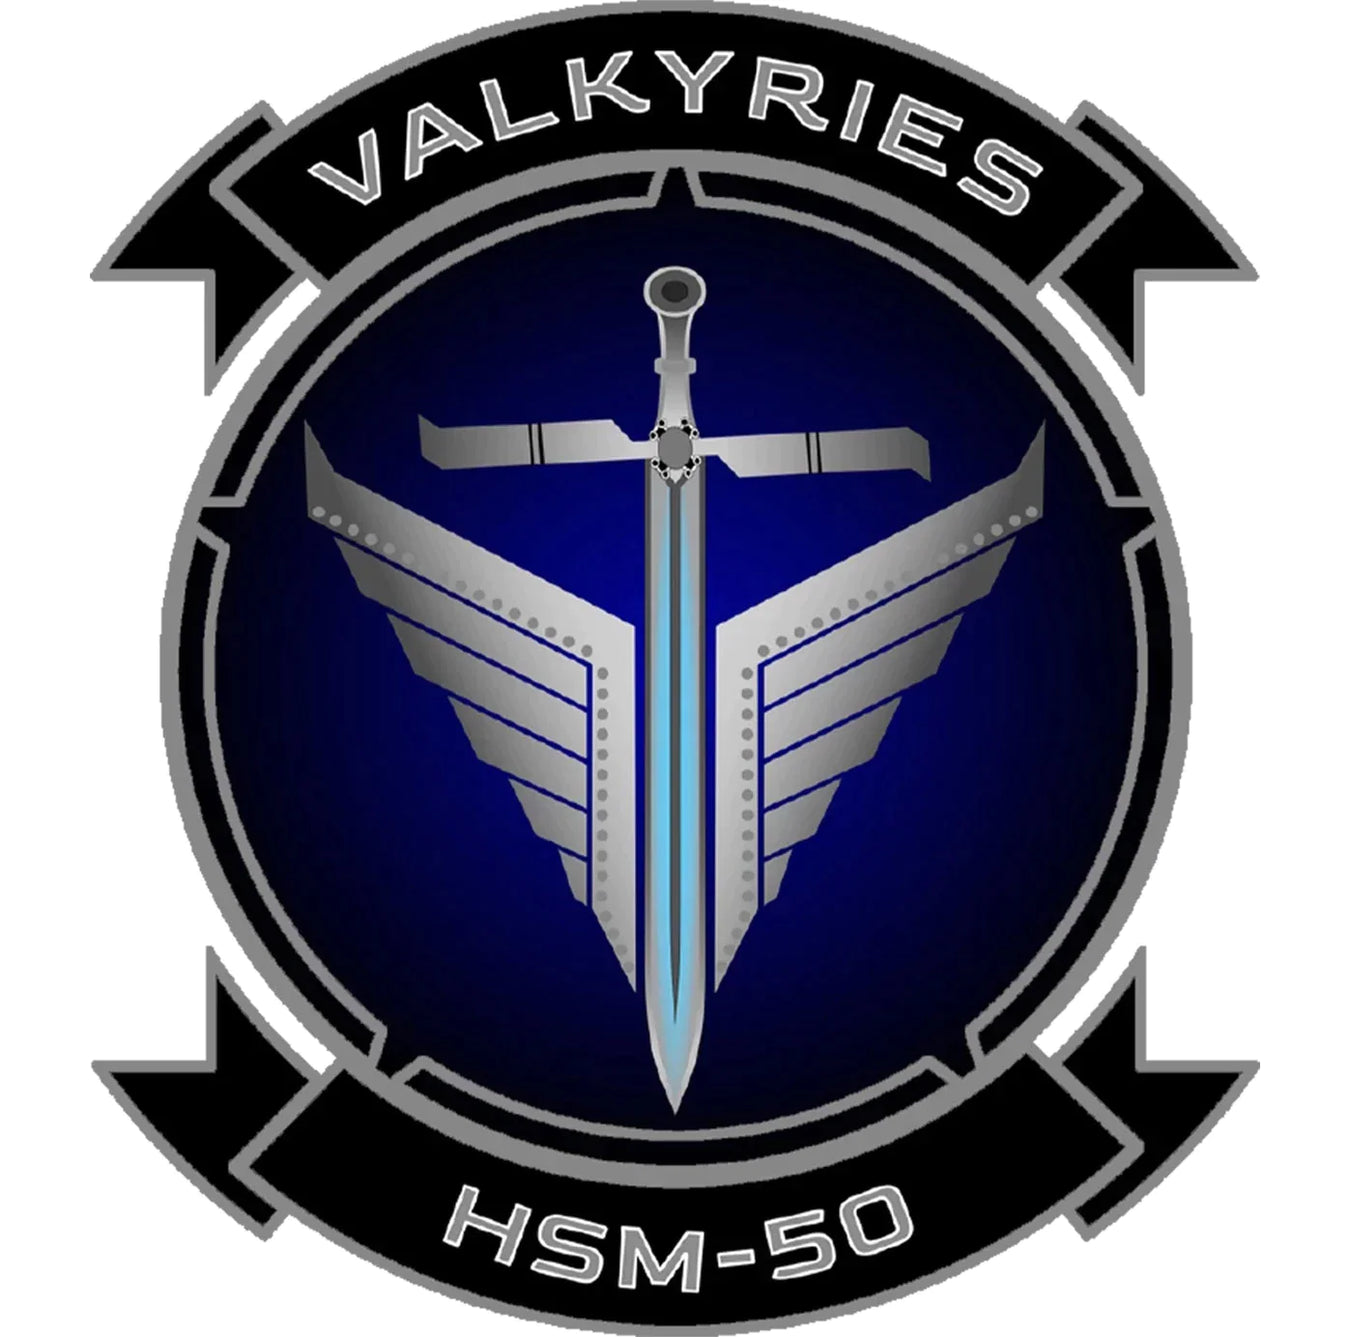 Helicopter Maritime Strike Squadron 50 (HSM-50) "Valkyries"